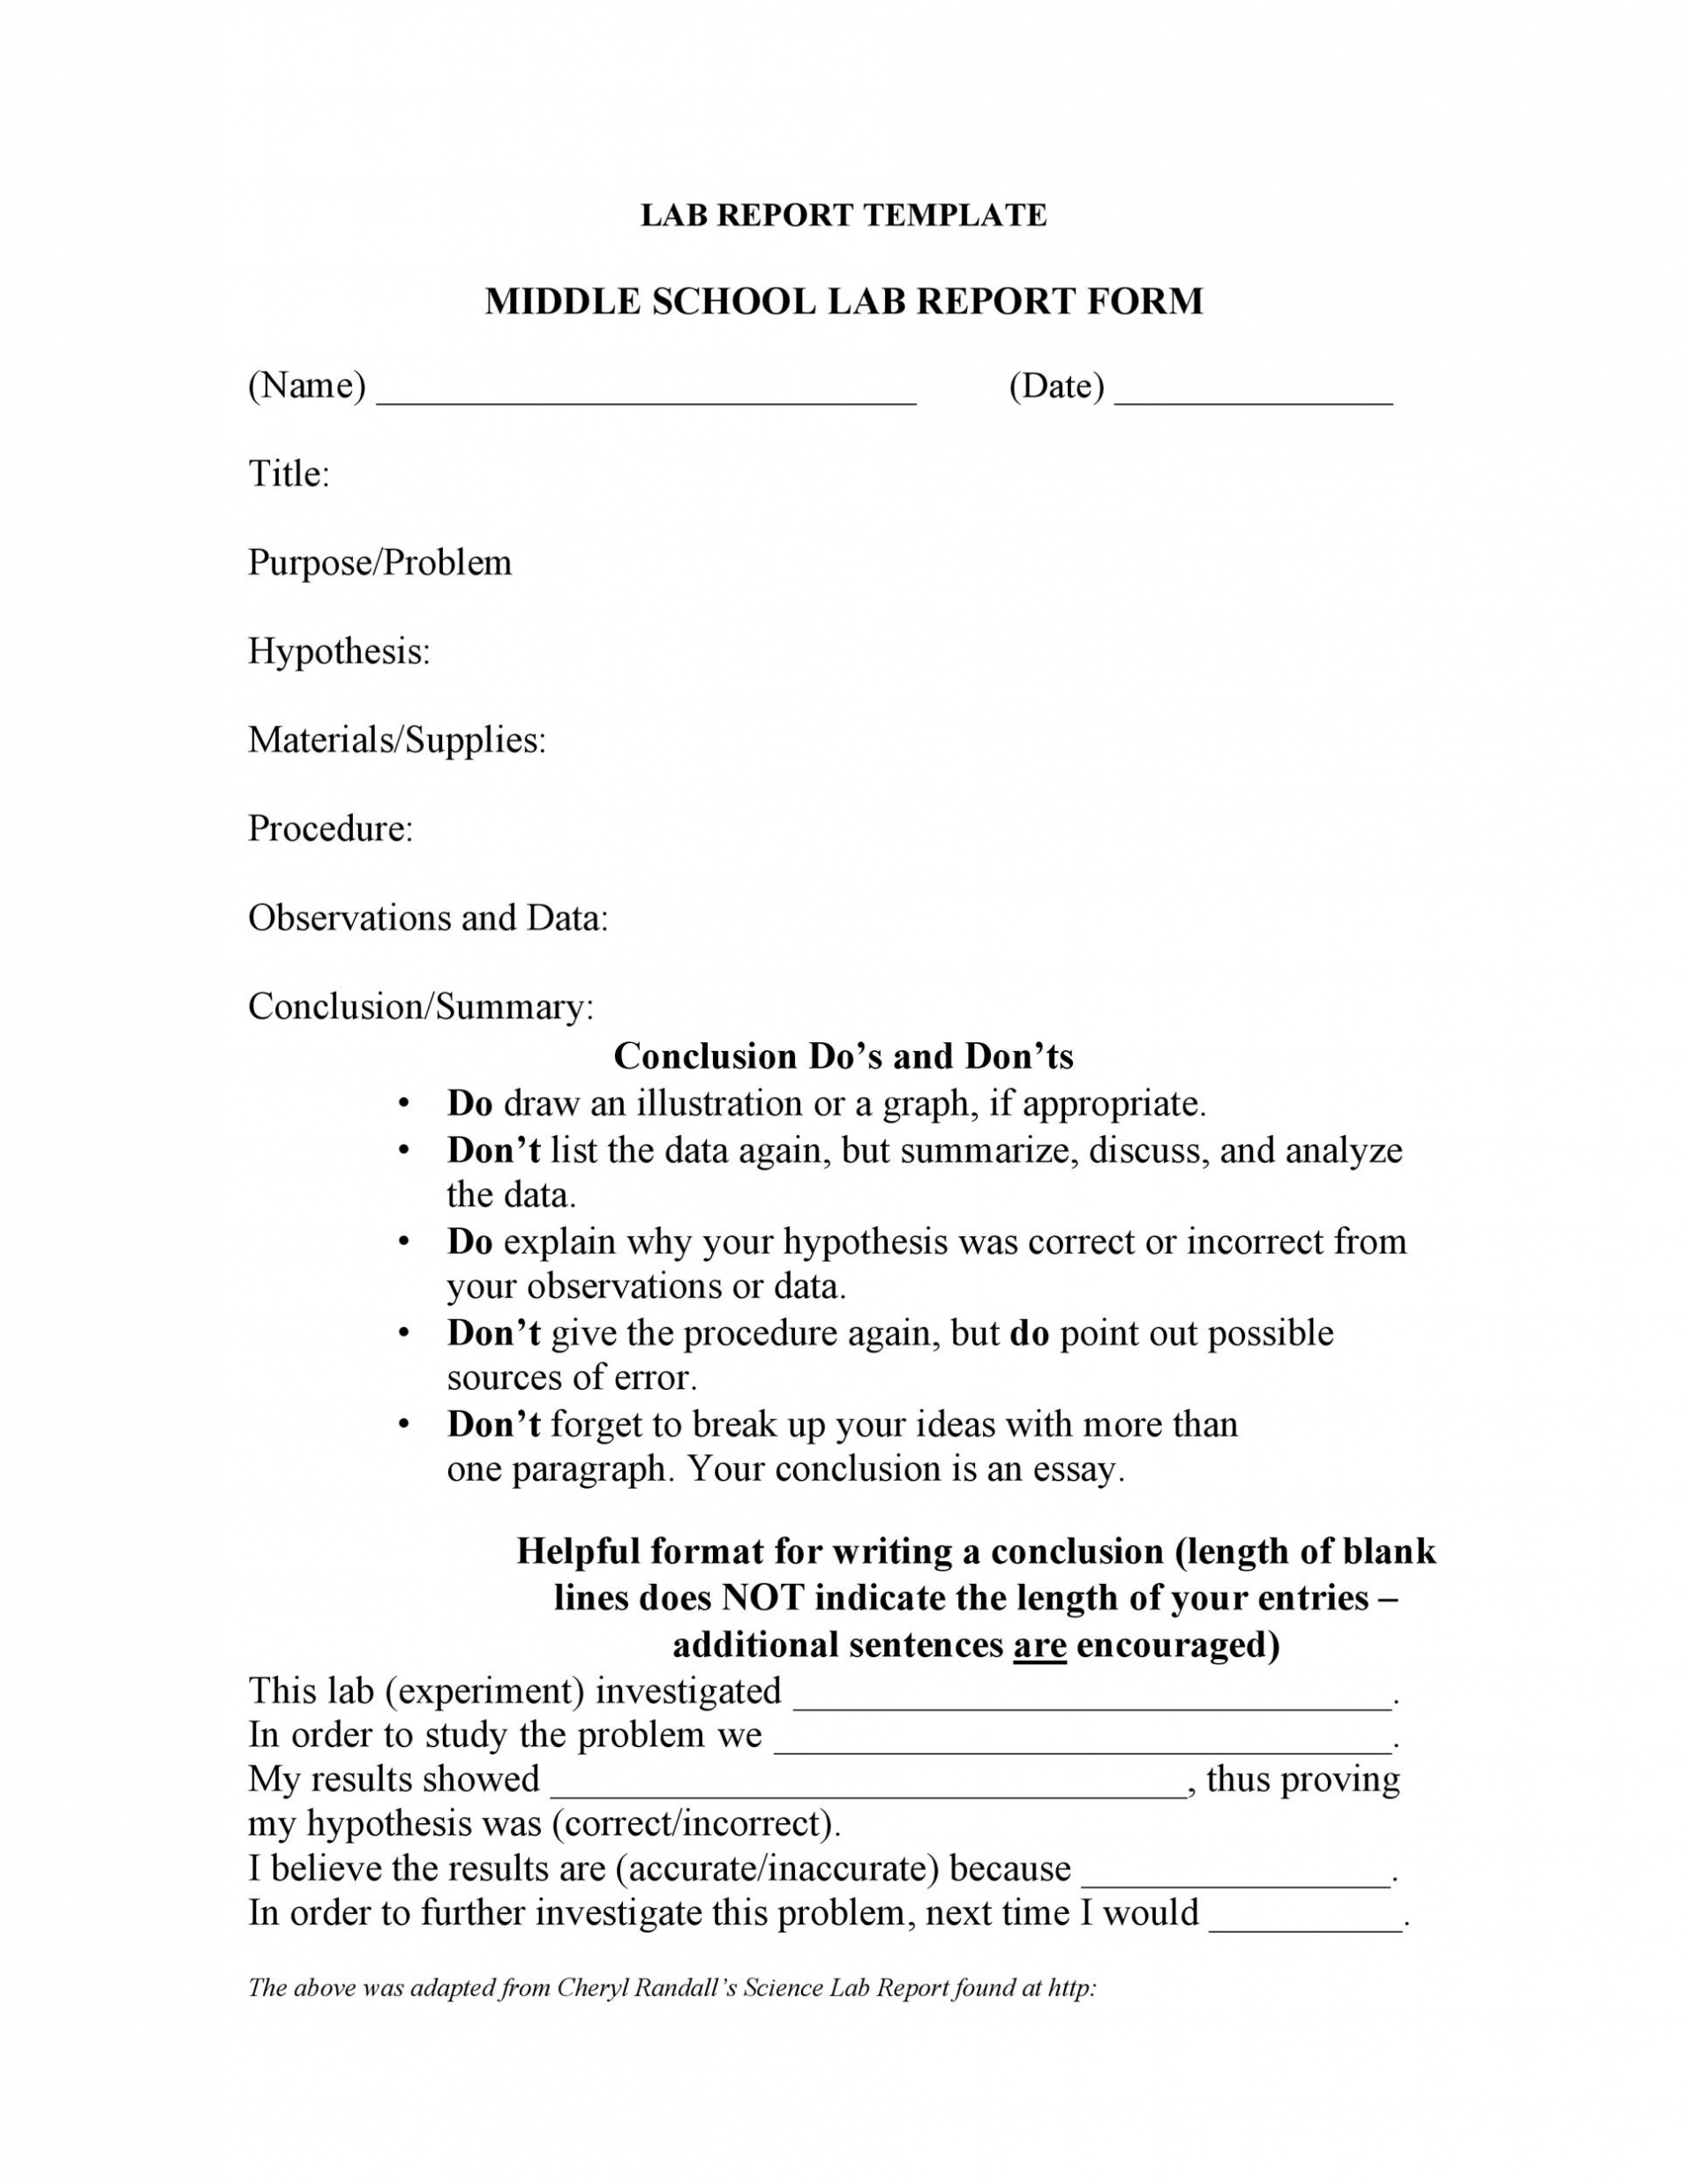 40 Lab Report Templates & Format Examples ᐅ Templatelab Inside Formal Lab Report Template